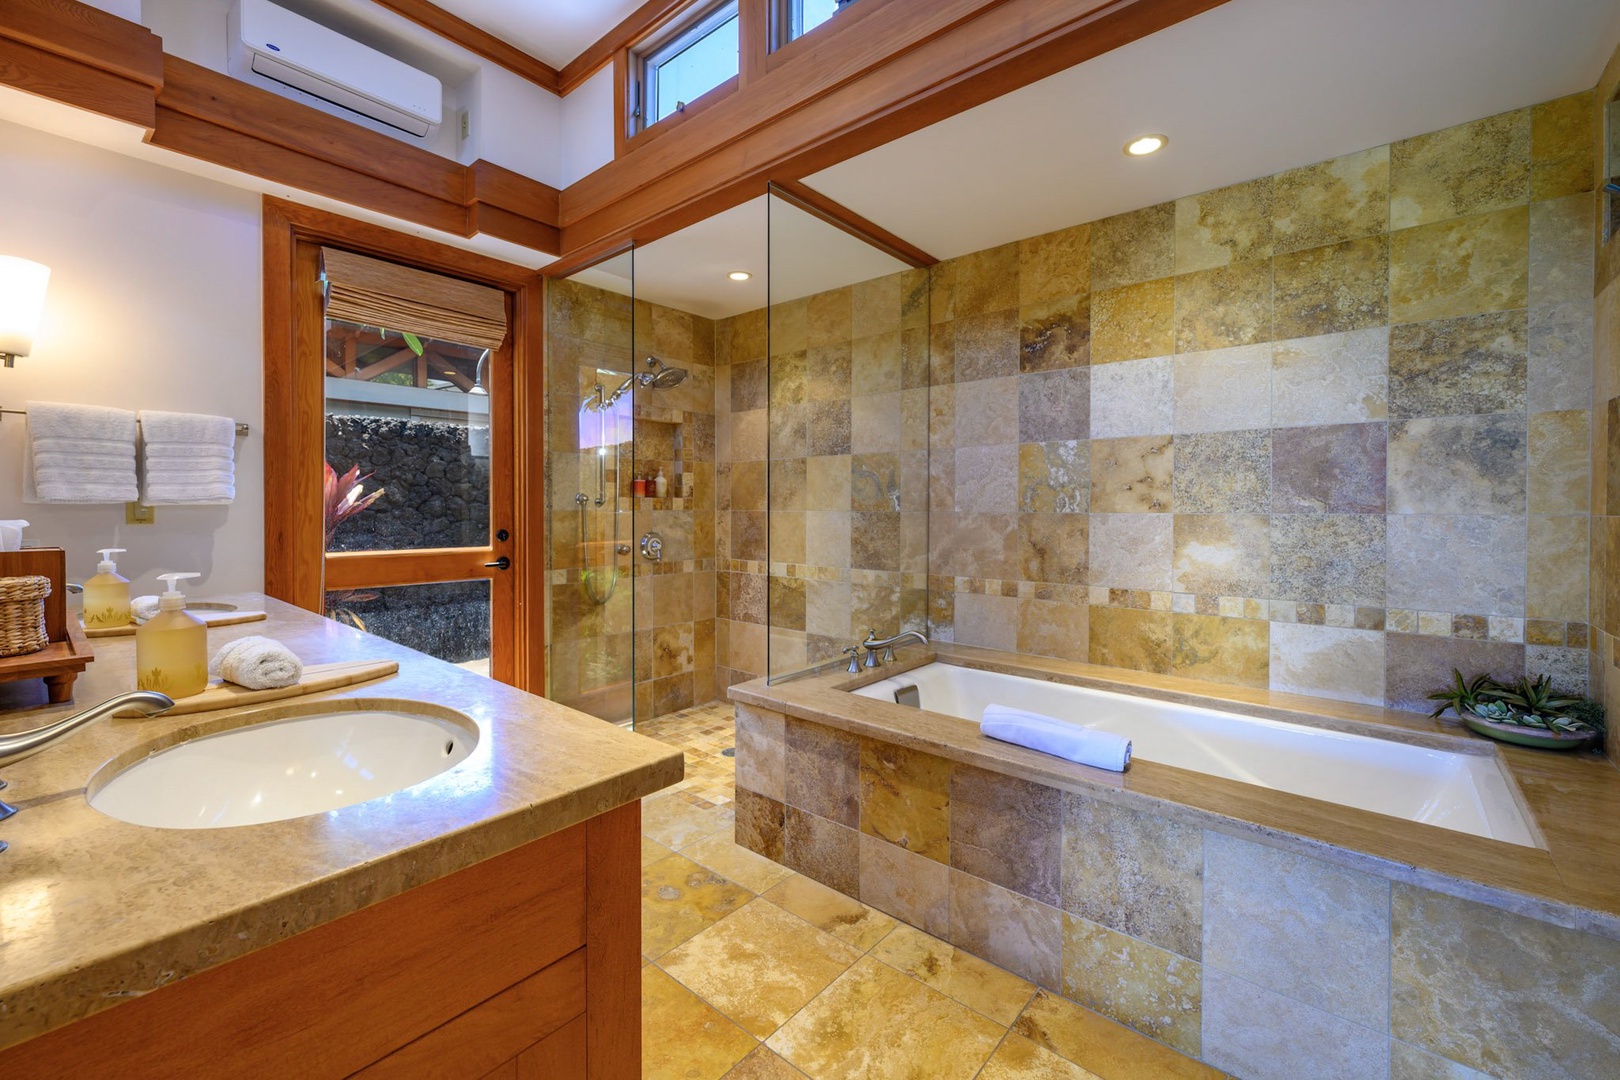 Kamuela Vacation Rentals, 3BD Na Hale 3 at Pauoa Beach Club at Mauna Lani Resort - The ensuite bathroom includes a soaker tub, a tiled glass wall-enclosed shower, dual vanity, and high ceilings.